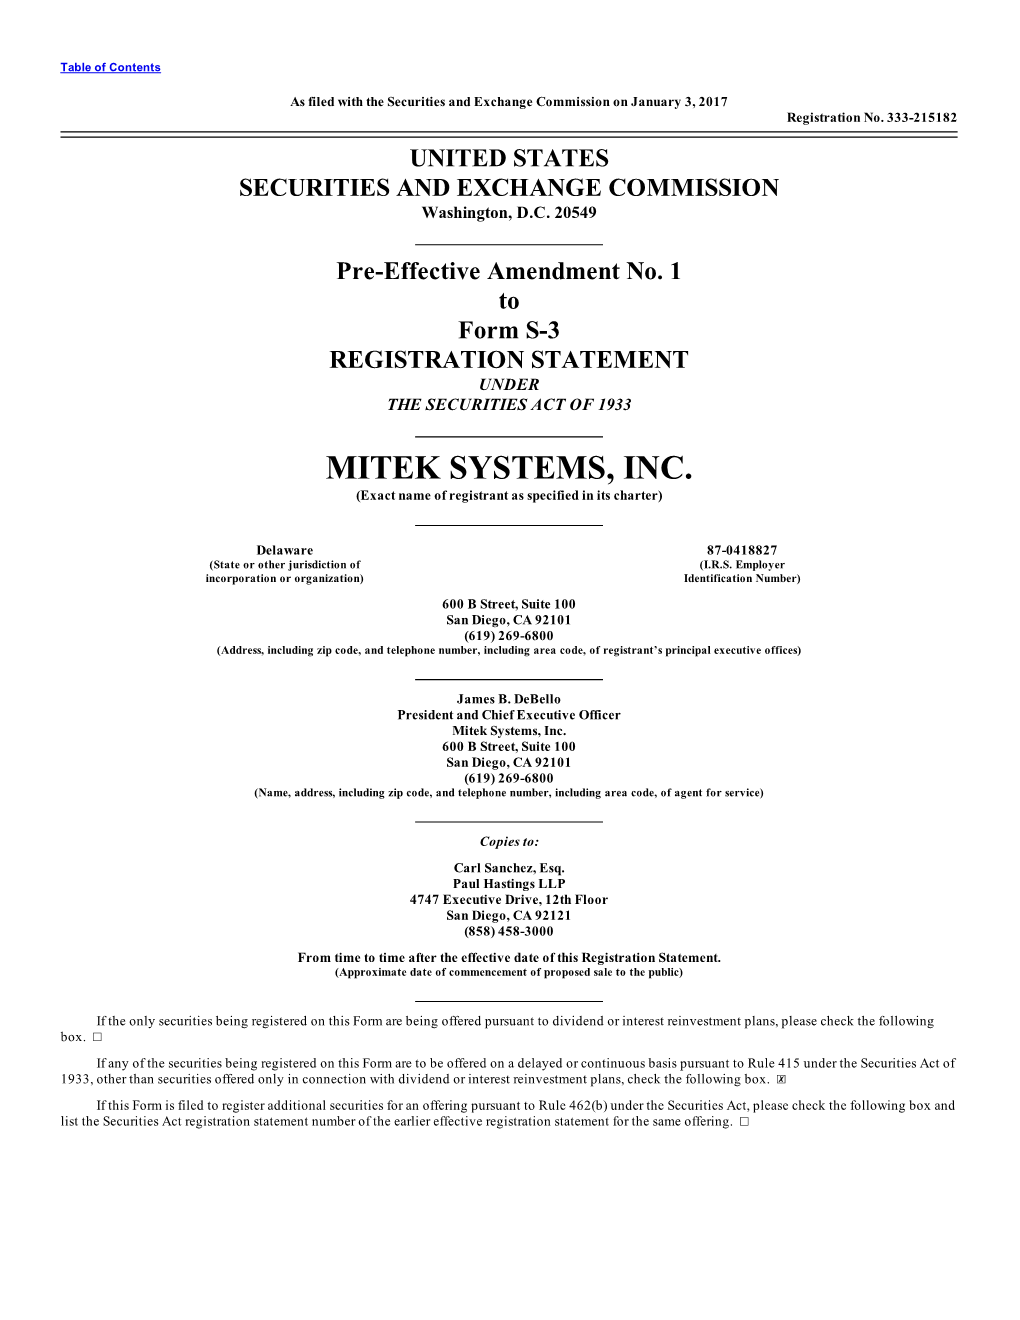 MITEK SYSTEMS, INC. (Exact Name of Registrant As Specified in Its Charter)